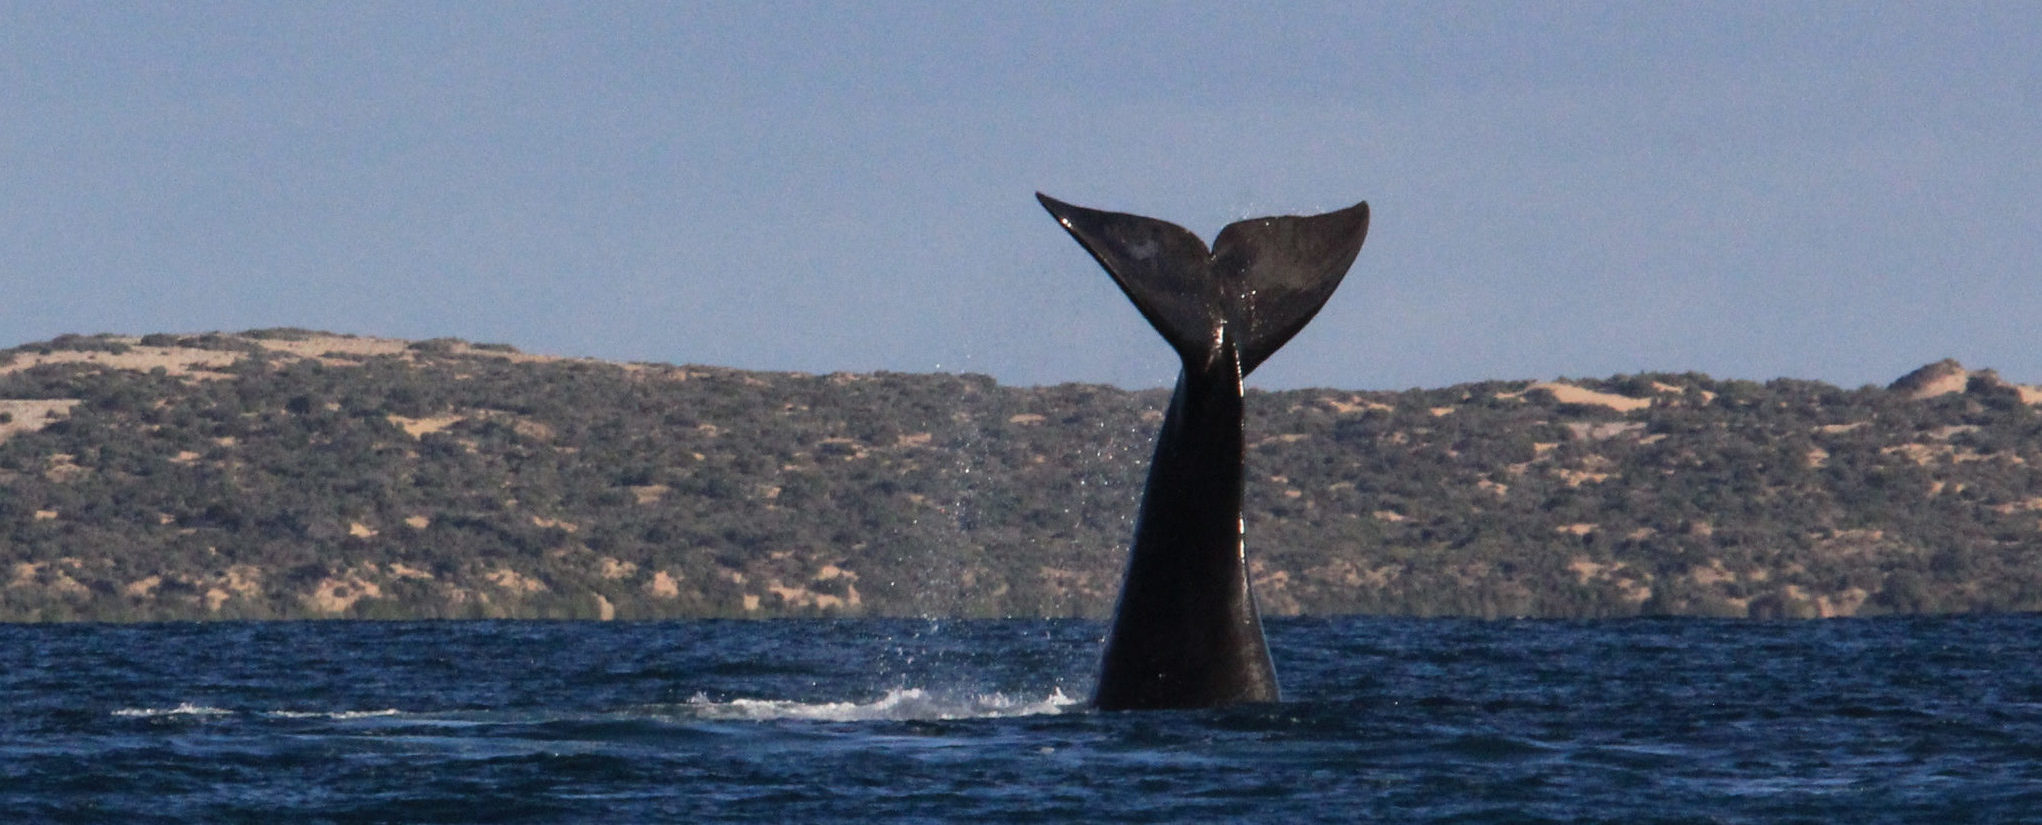 A whale in the Great Australian Bight raising its tail.